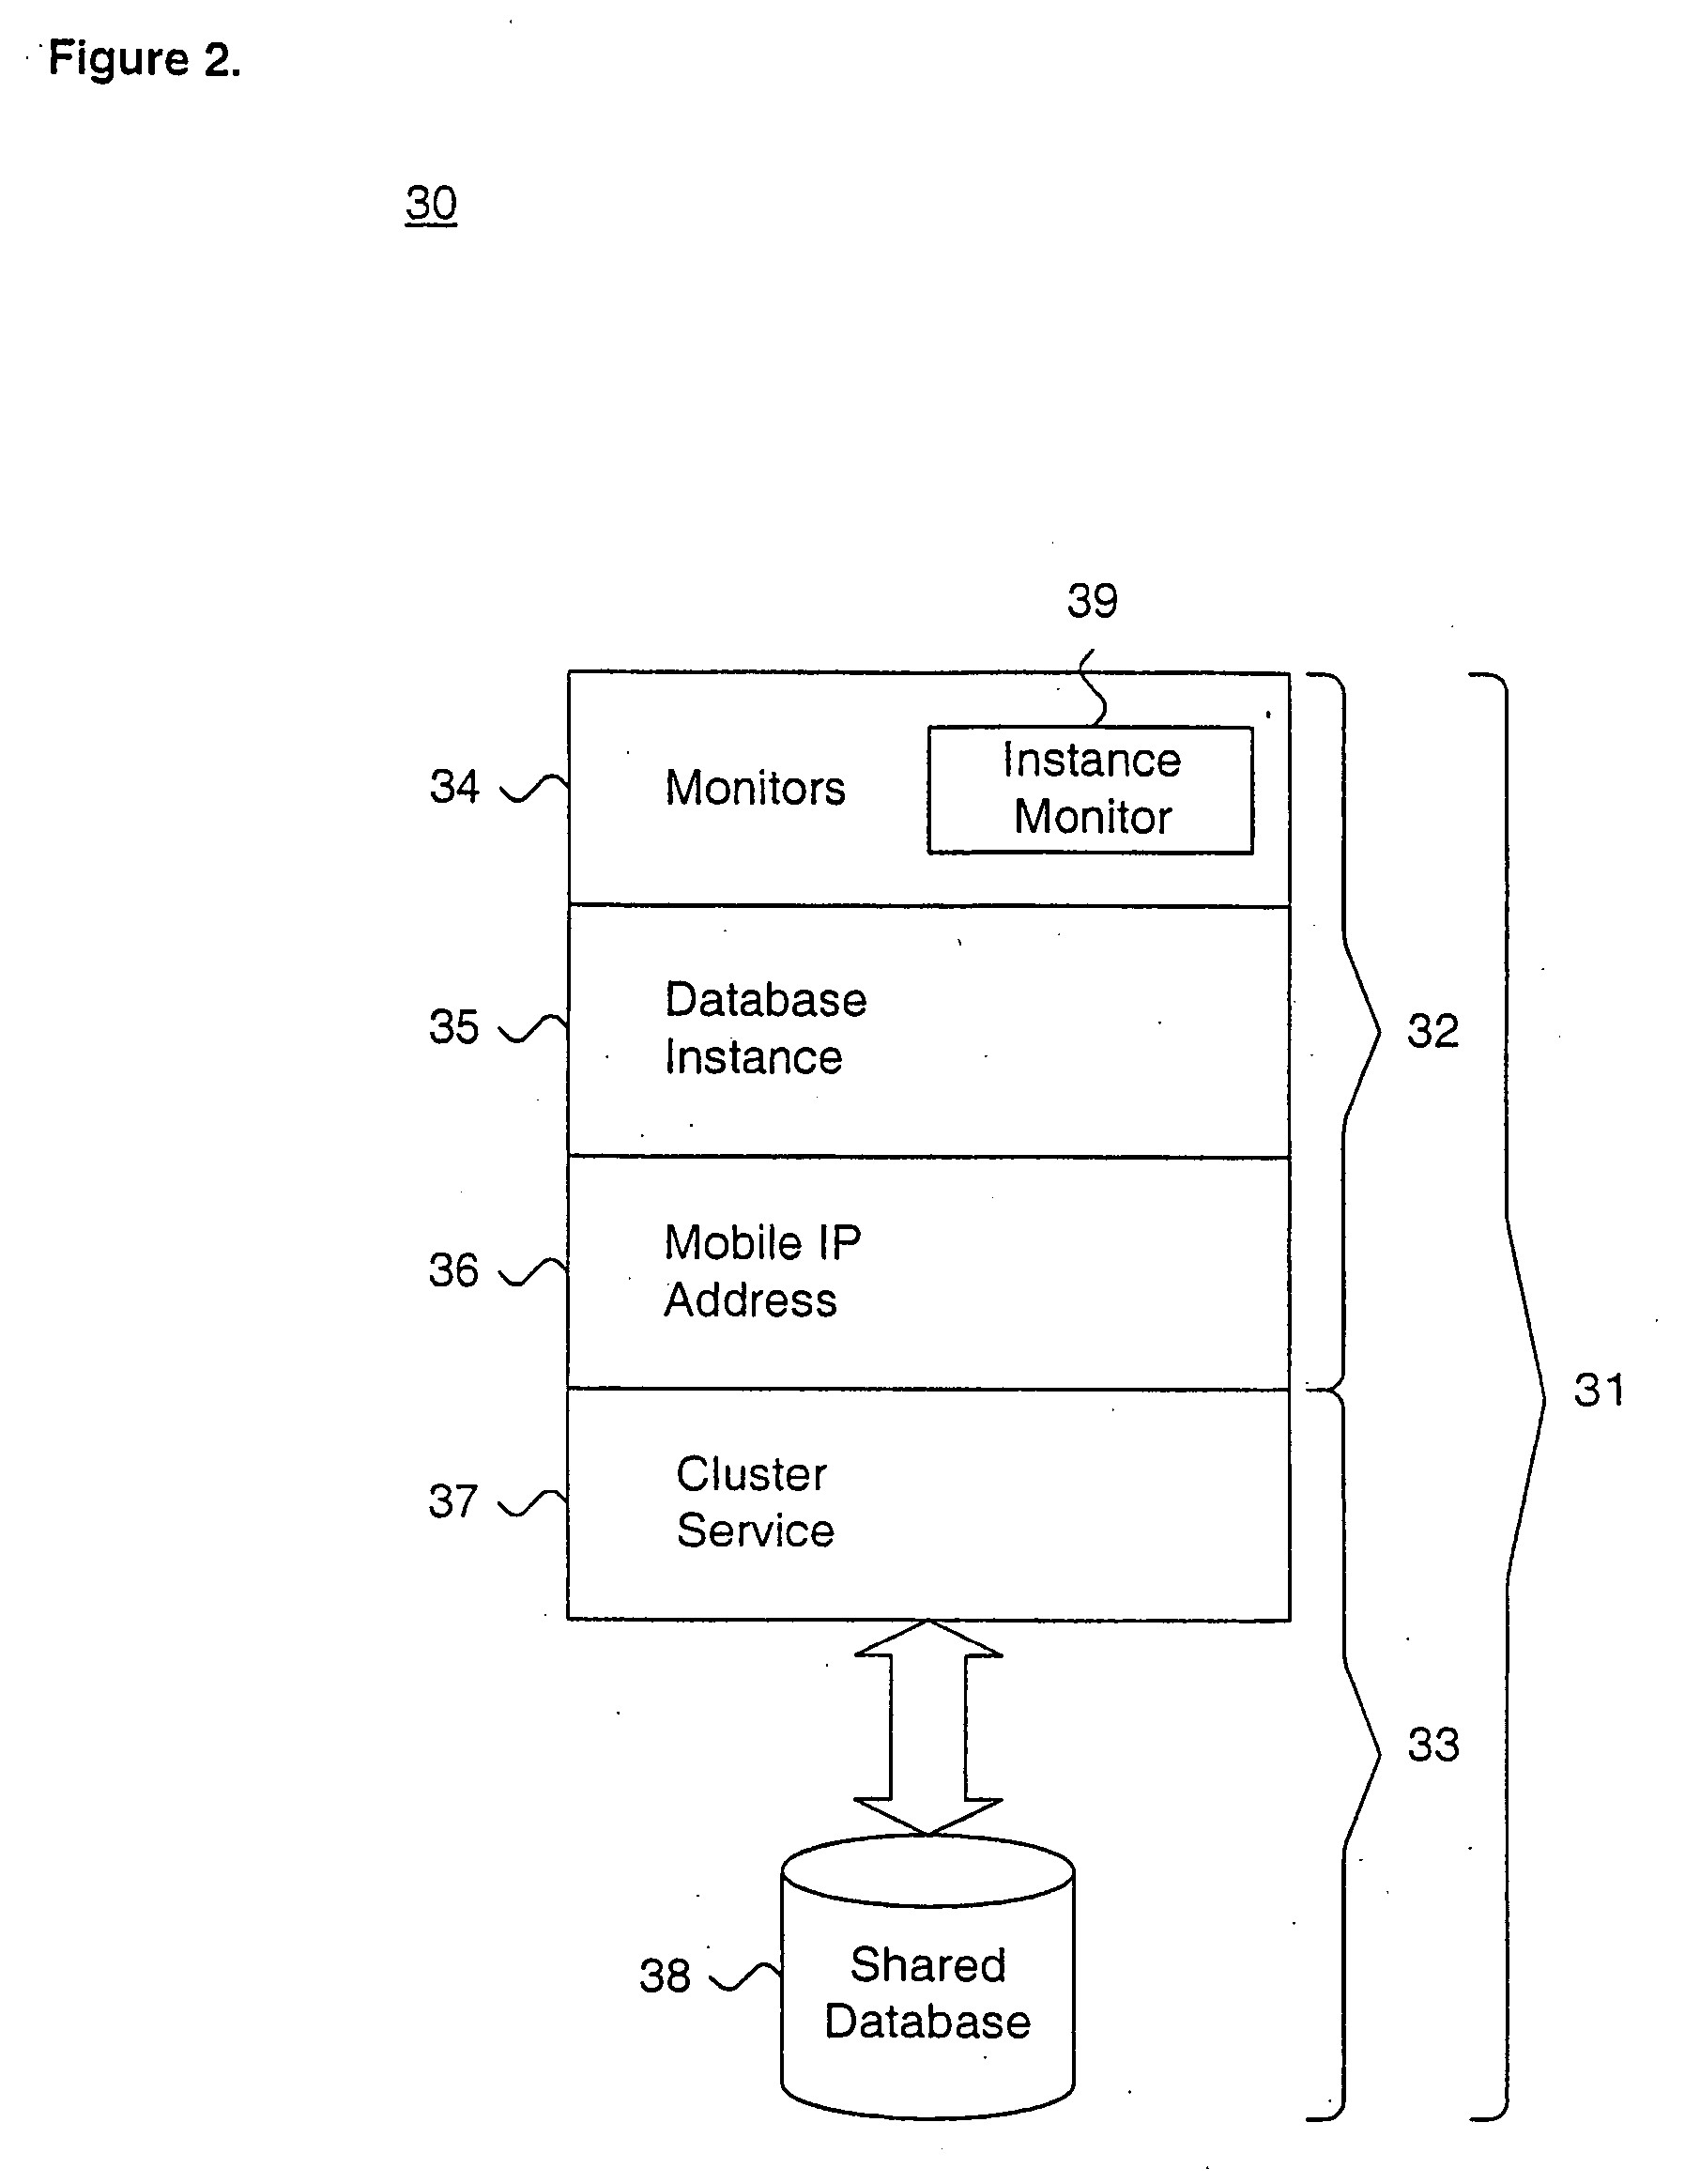 System and method for detecting termination of an application instance using locks